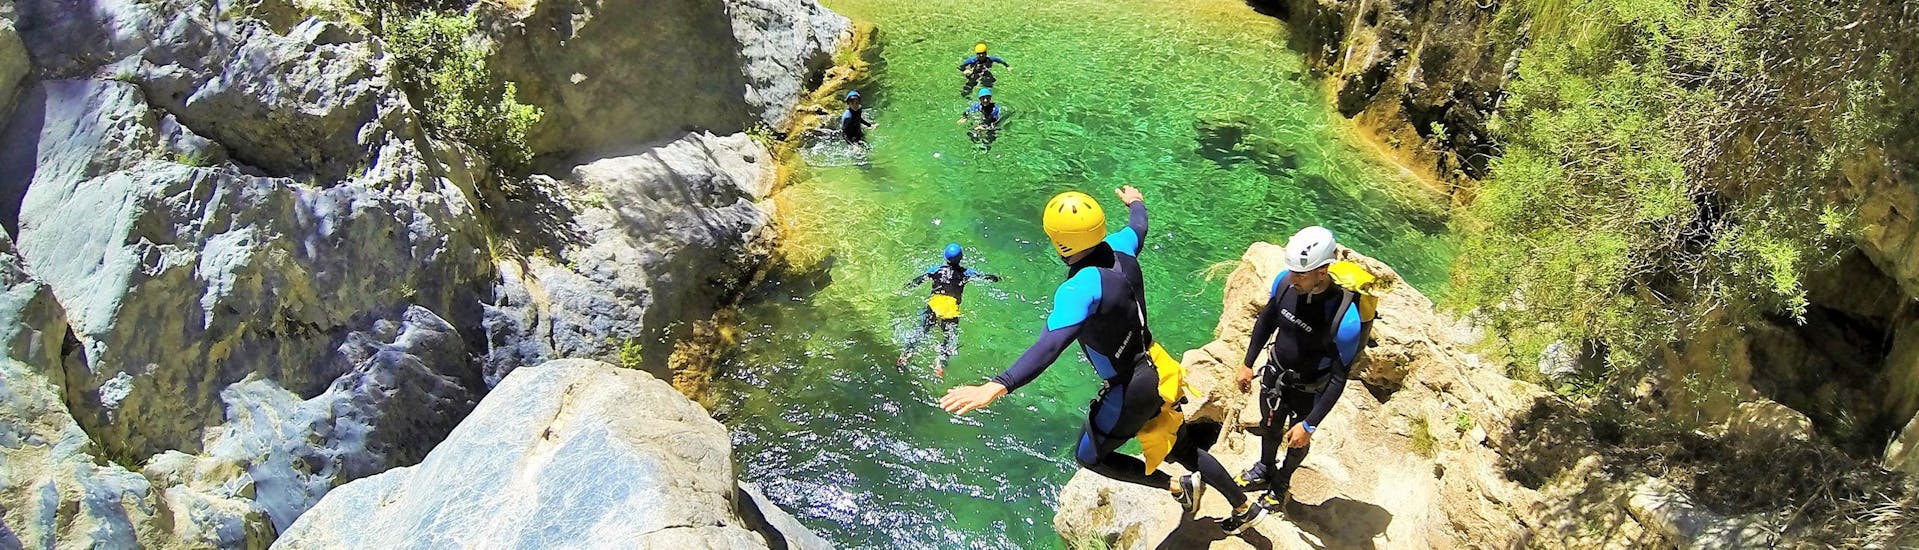 A group of friends jumps from the cliff into the clear waters during the canyoning advanced tour in the Rio Verde of Barranquismo Rio Verde.